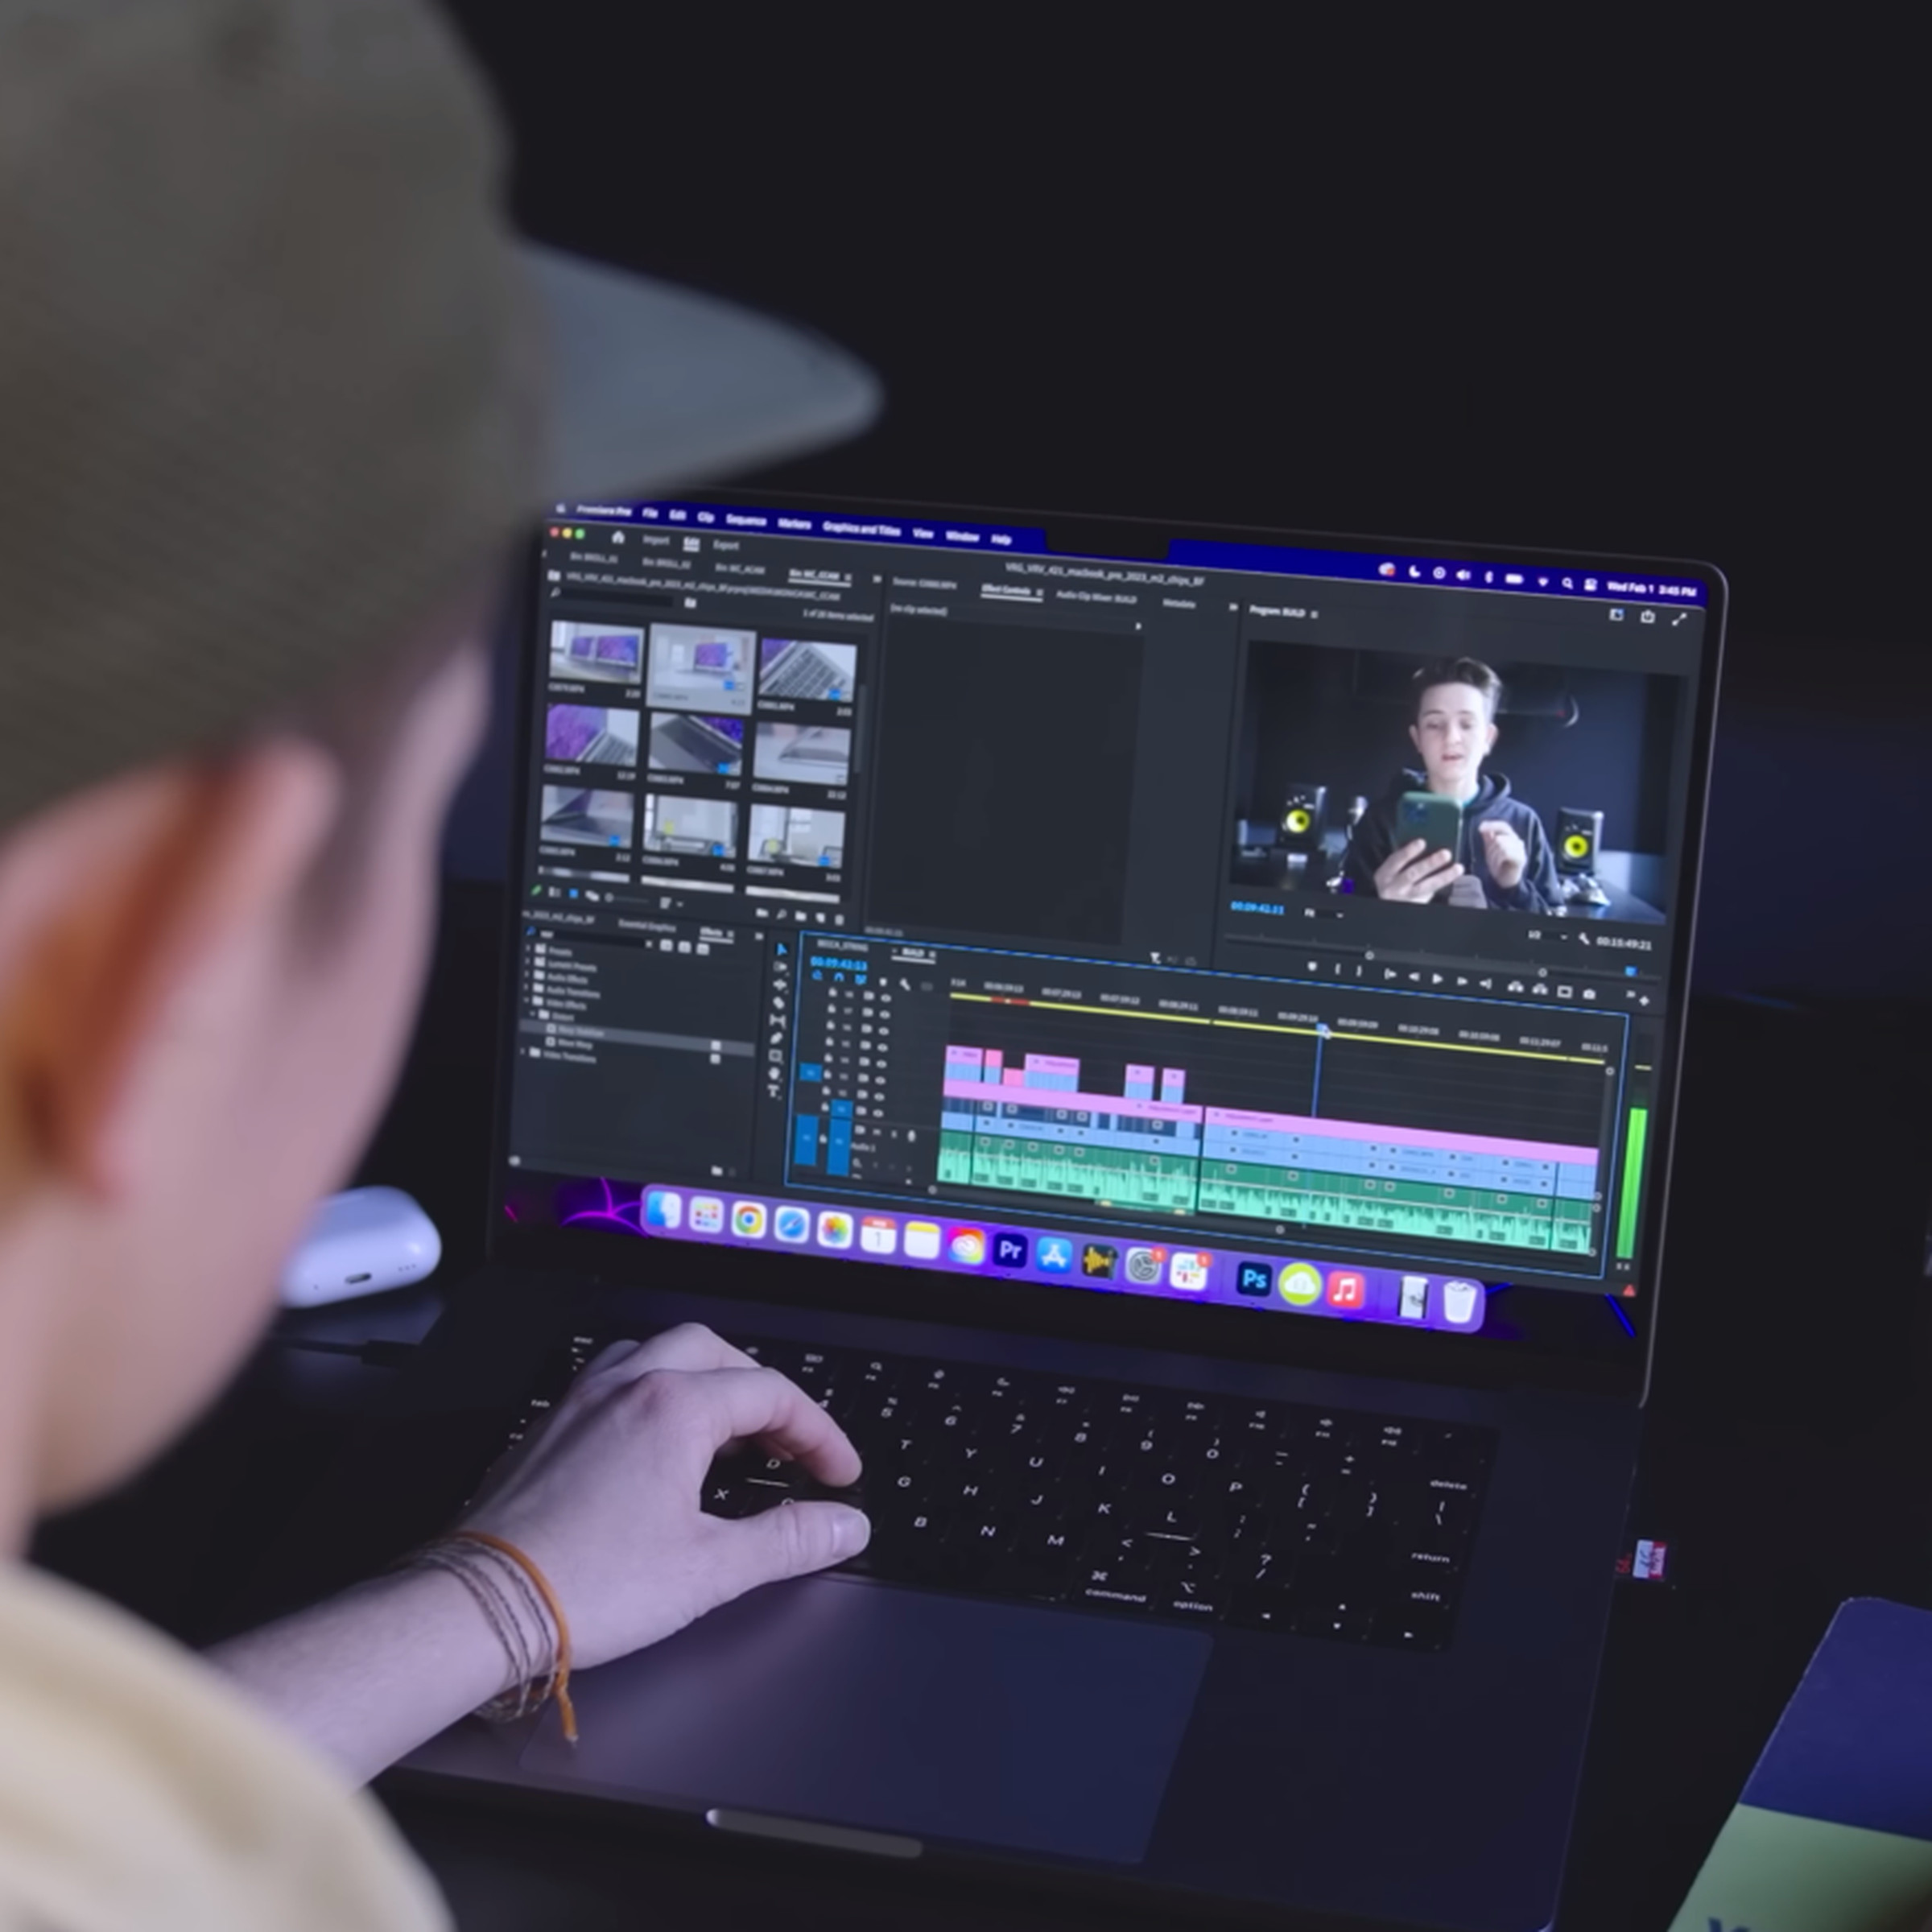 A user edits a video in Premiere Pro on the MacBook Pro 16.